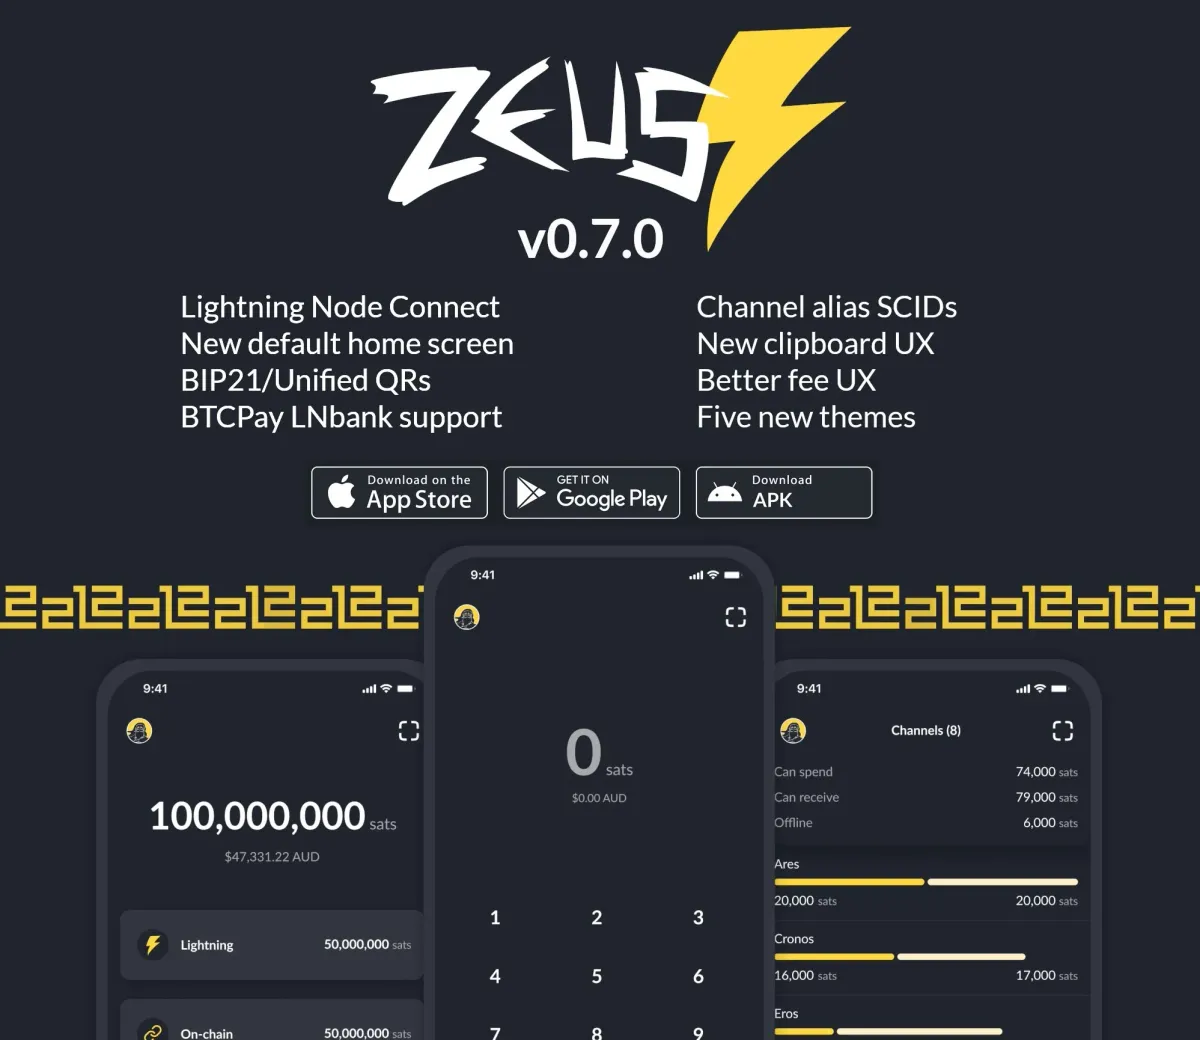 Zeus v0.7.0: Lightning Node Connect, BIP21/Unified QRs, New Home Screen, and More